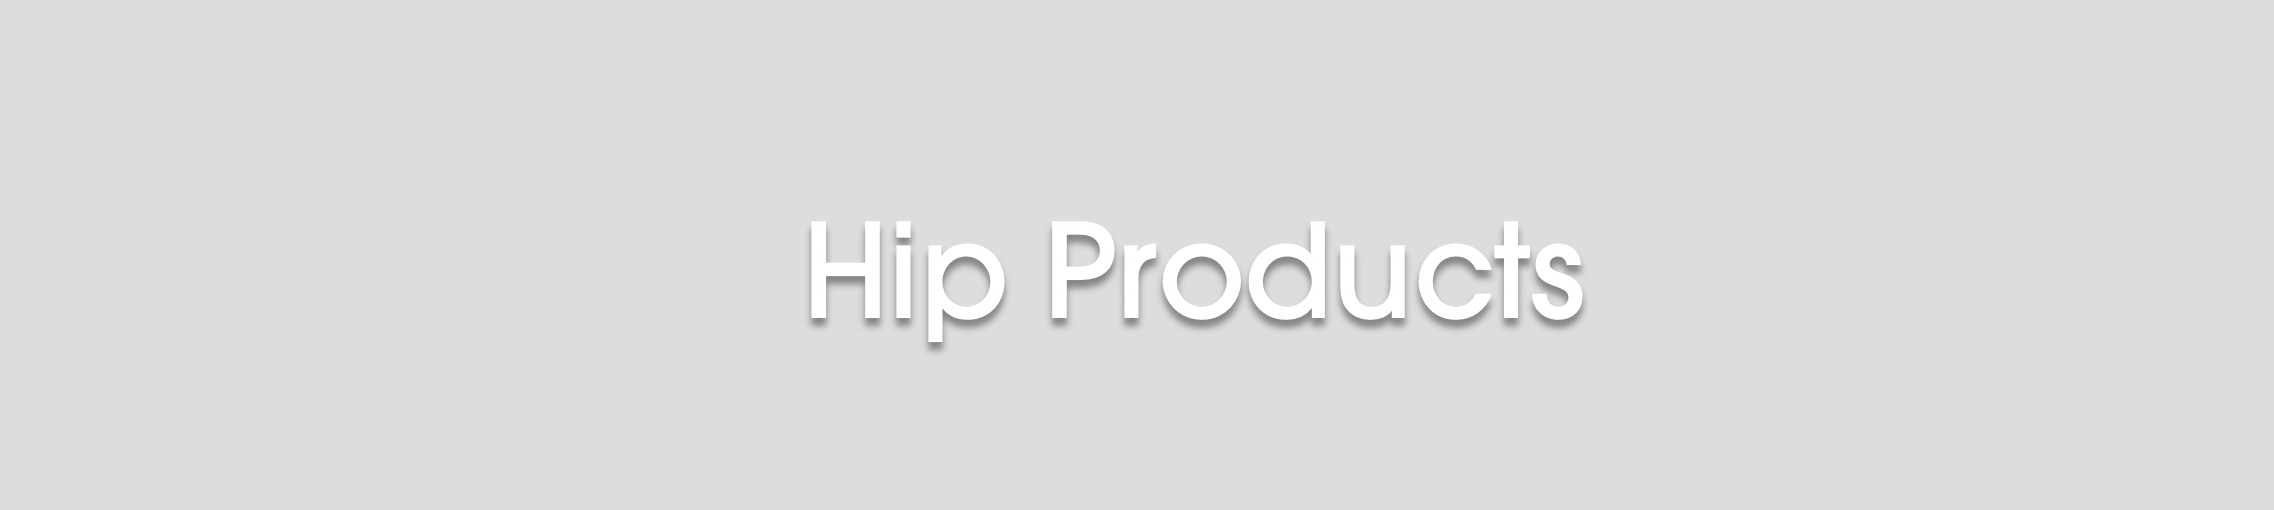 HIP PRODUCTS